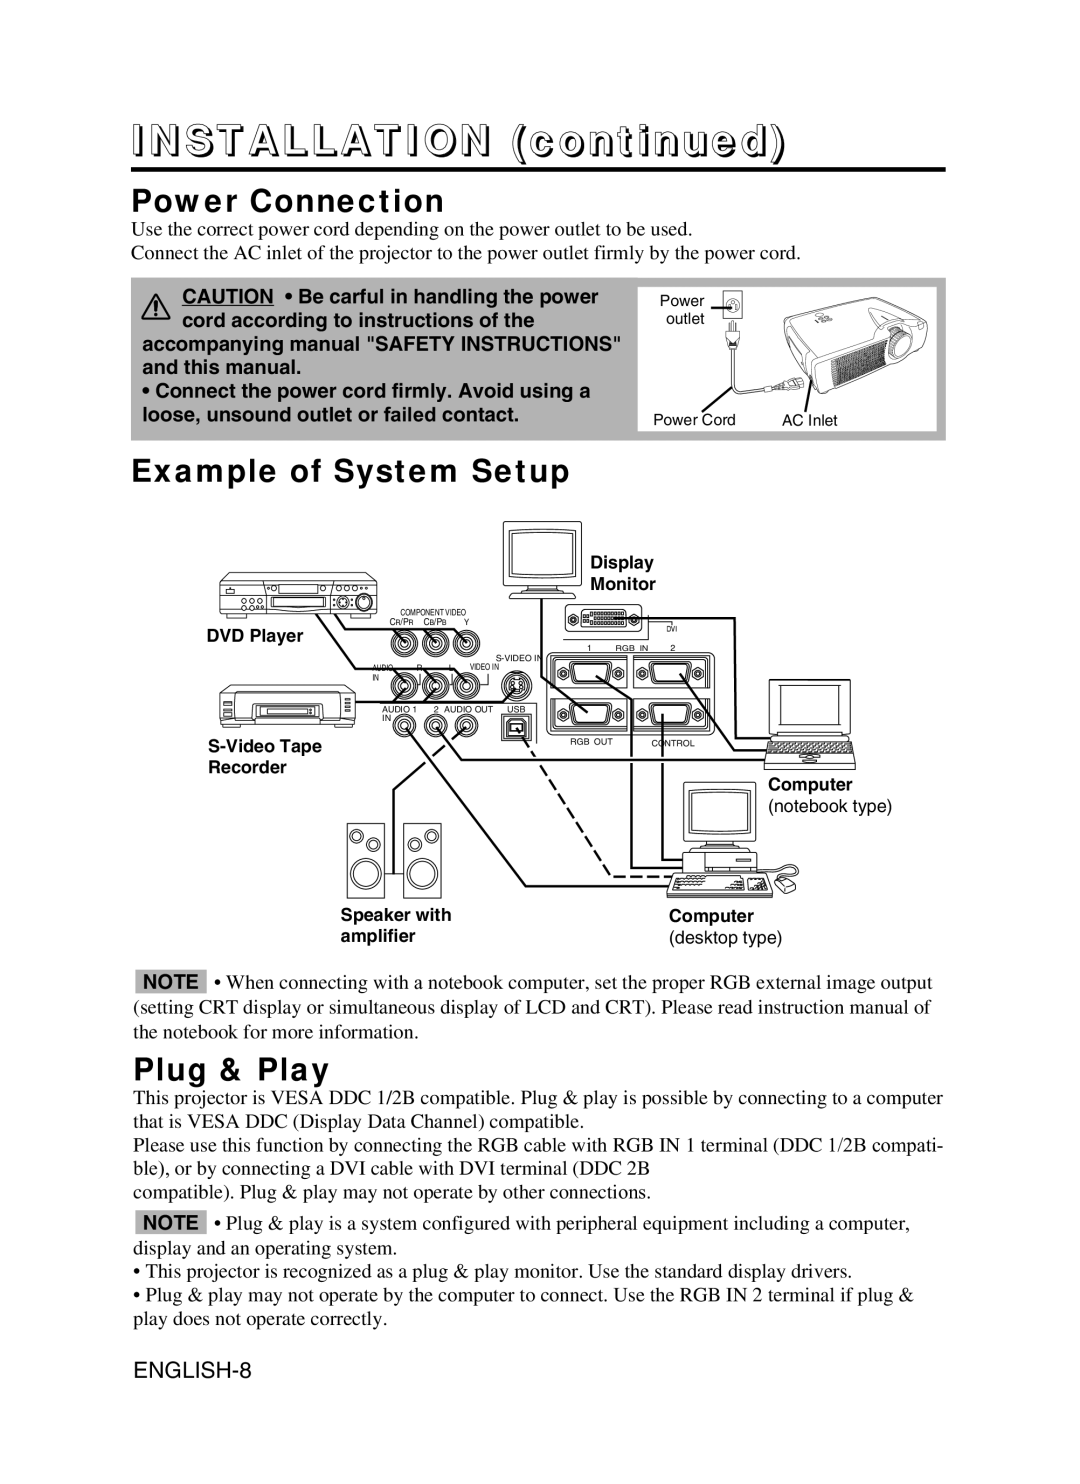 BOXLIGHT CP-775I user manual Power Connection, Example of System Setup, Plug & Play, ENGLISH-8, INSTALLATION continued 